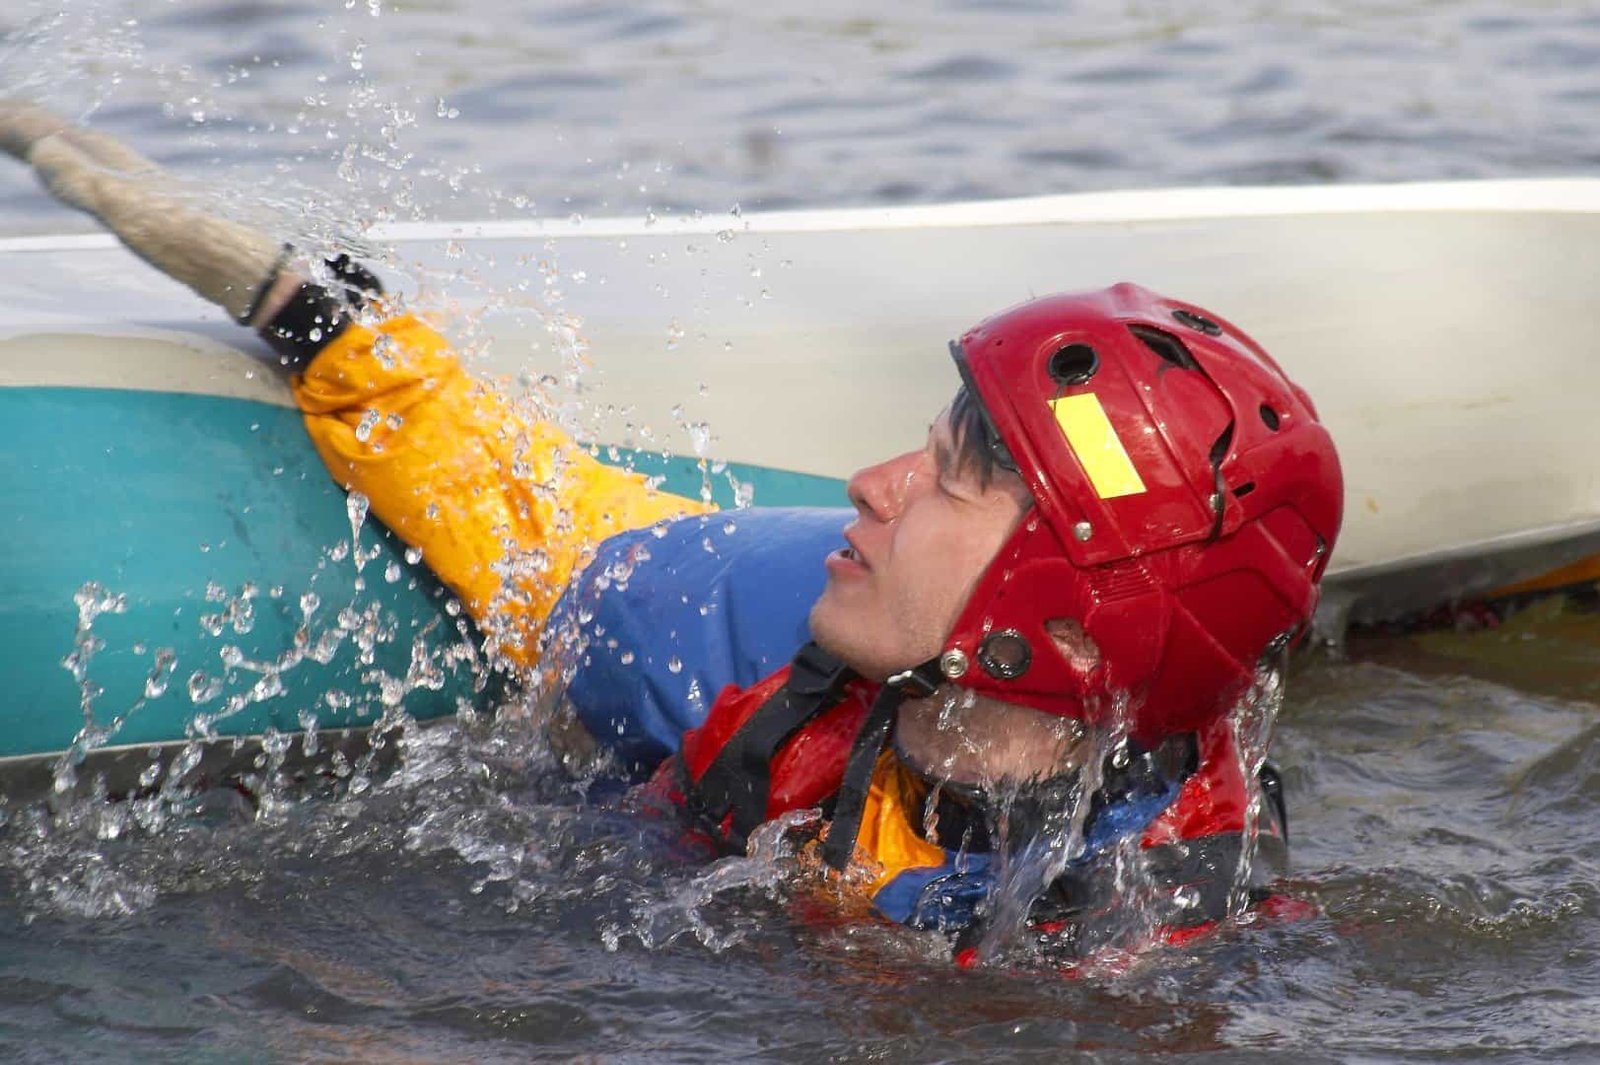 Falling and entering a kayak from the water